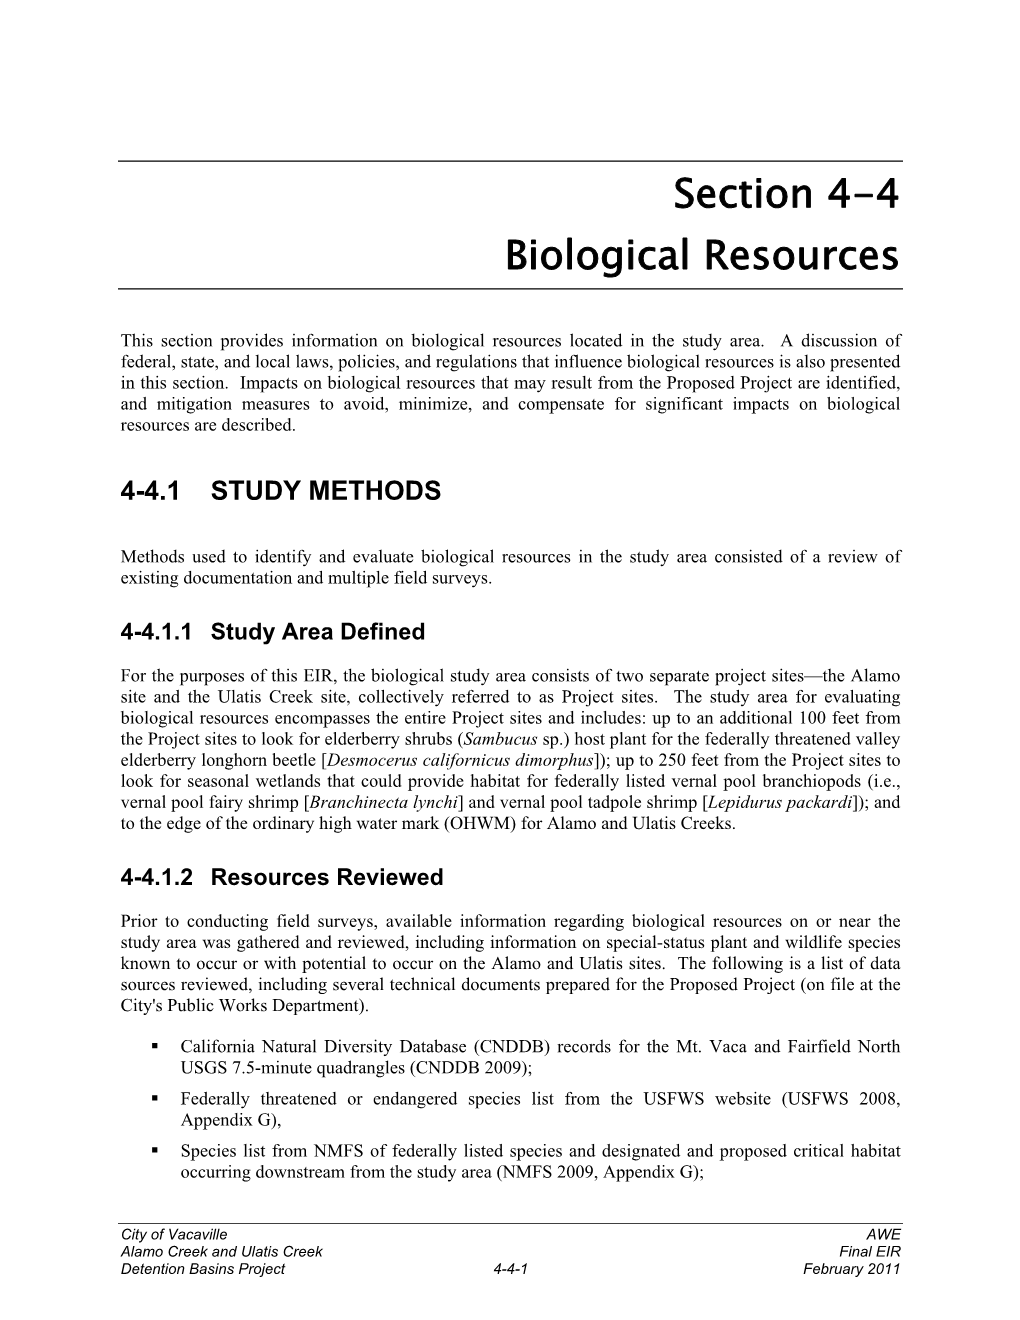 Section 4-4 Biological Resources